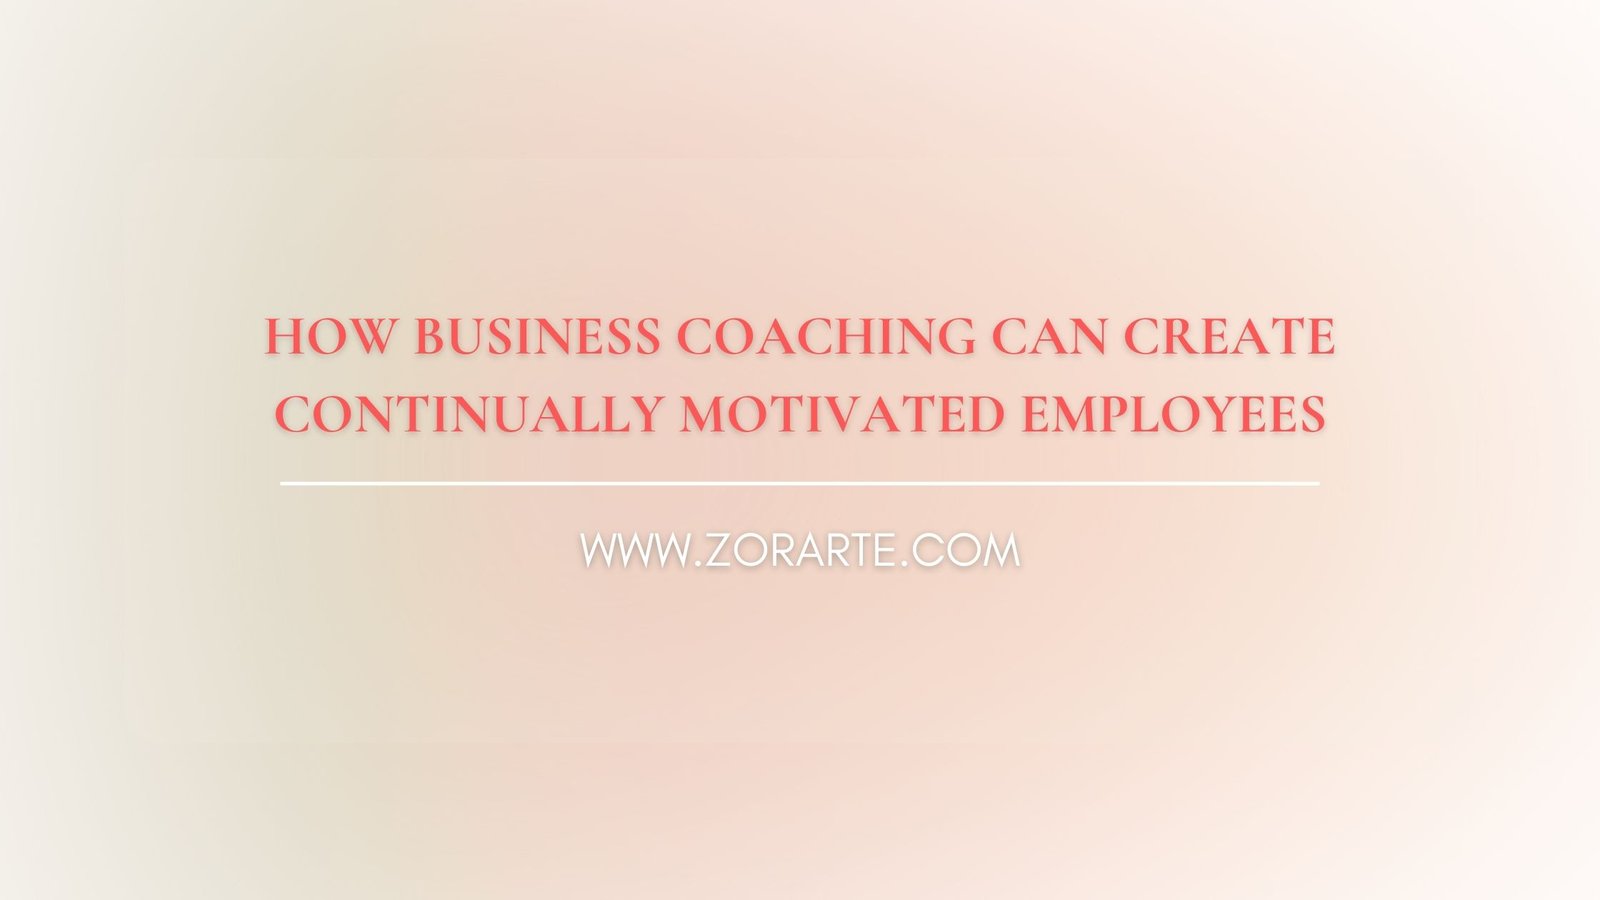 How Business Coaching Can Create Continually Motivated Employees